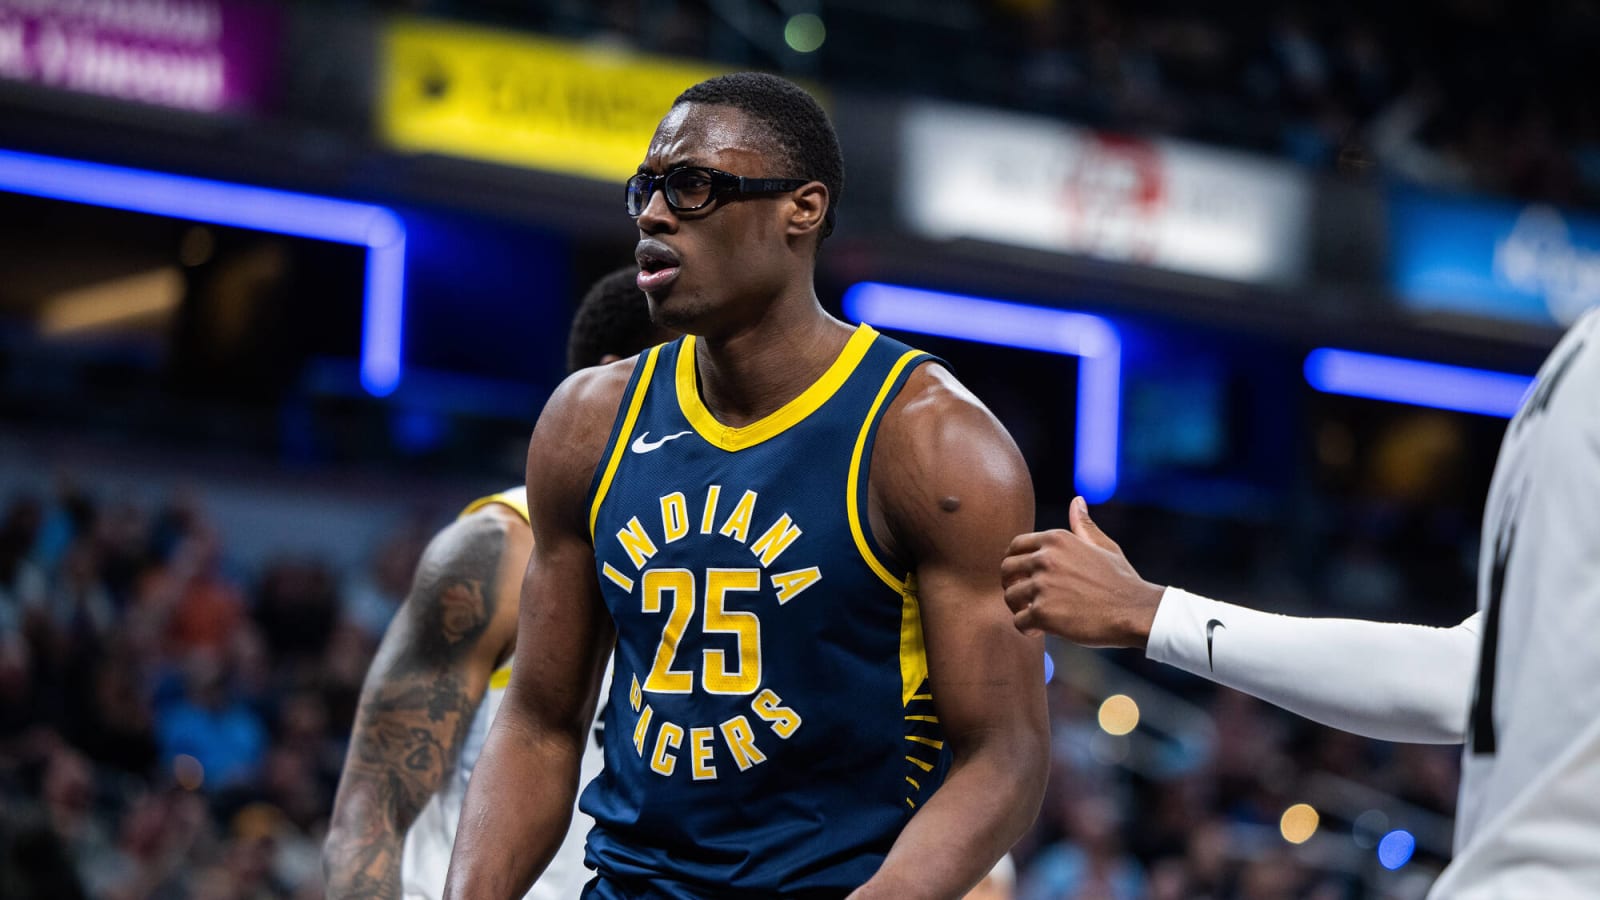 Indiana Pacers center Jalen Smith dealing with head injury after hard hit against Philadelphia 76ers